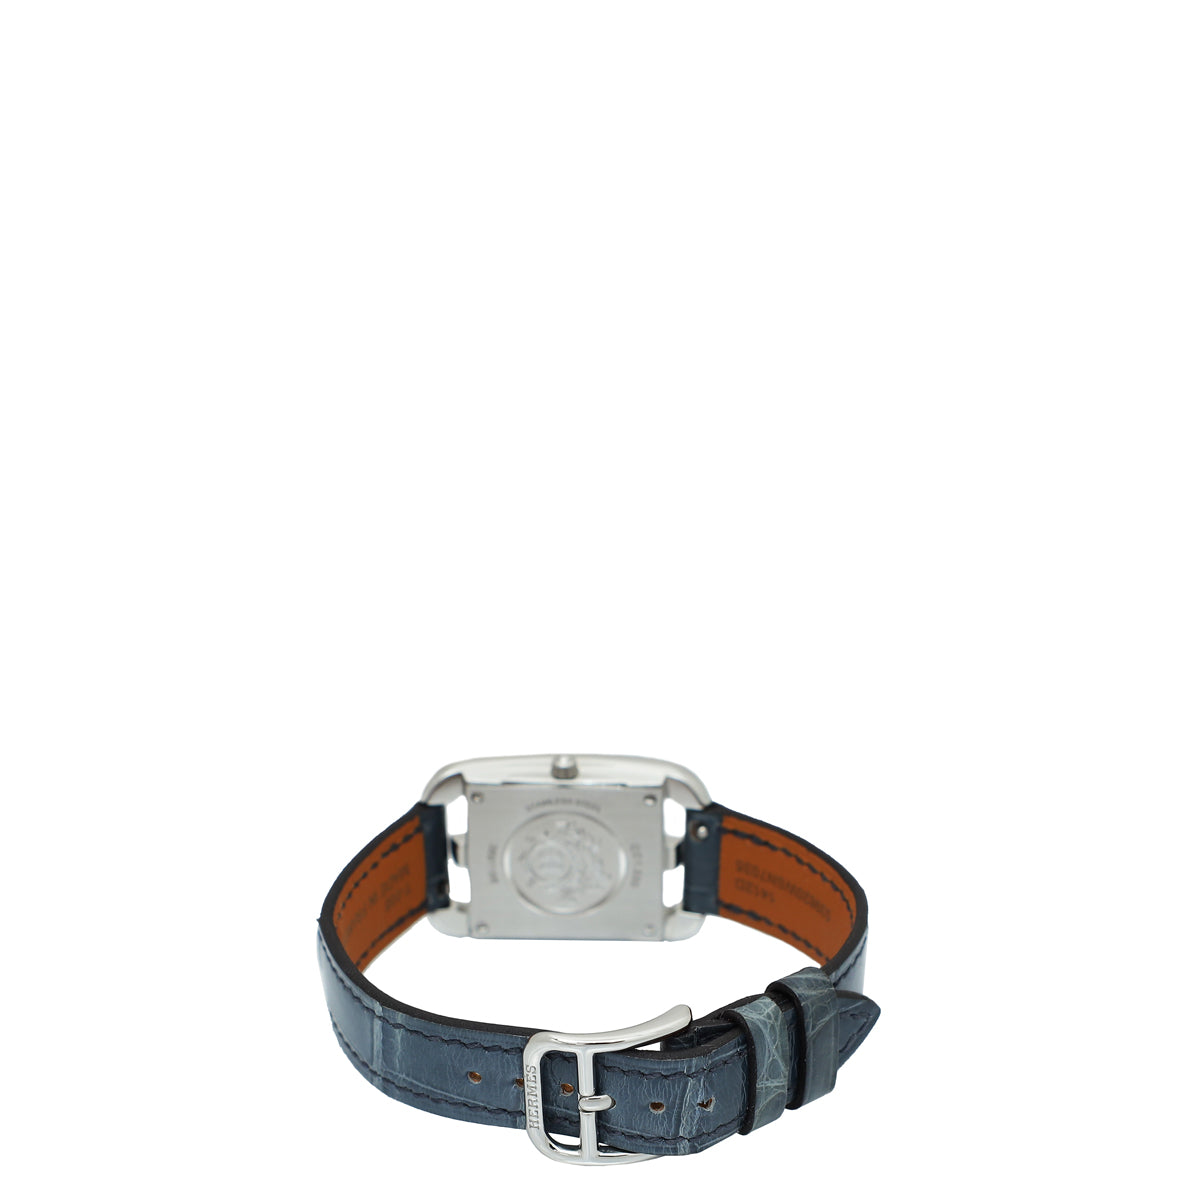 Load image into Gallery viewer, Hermes ST.ST Diamond Cape Cod Small Model 31mm Quartz watch
